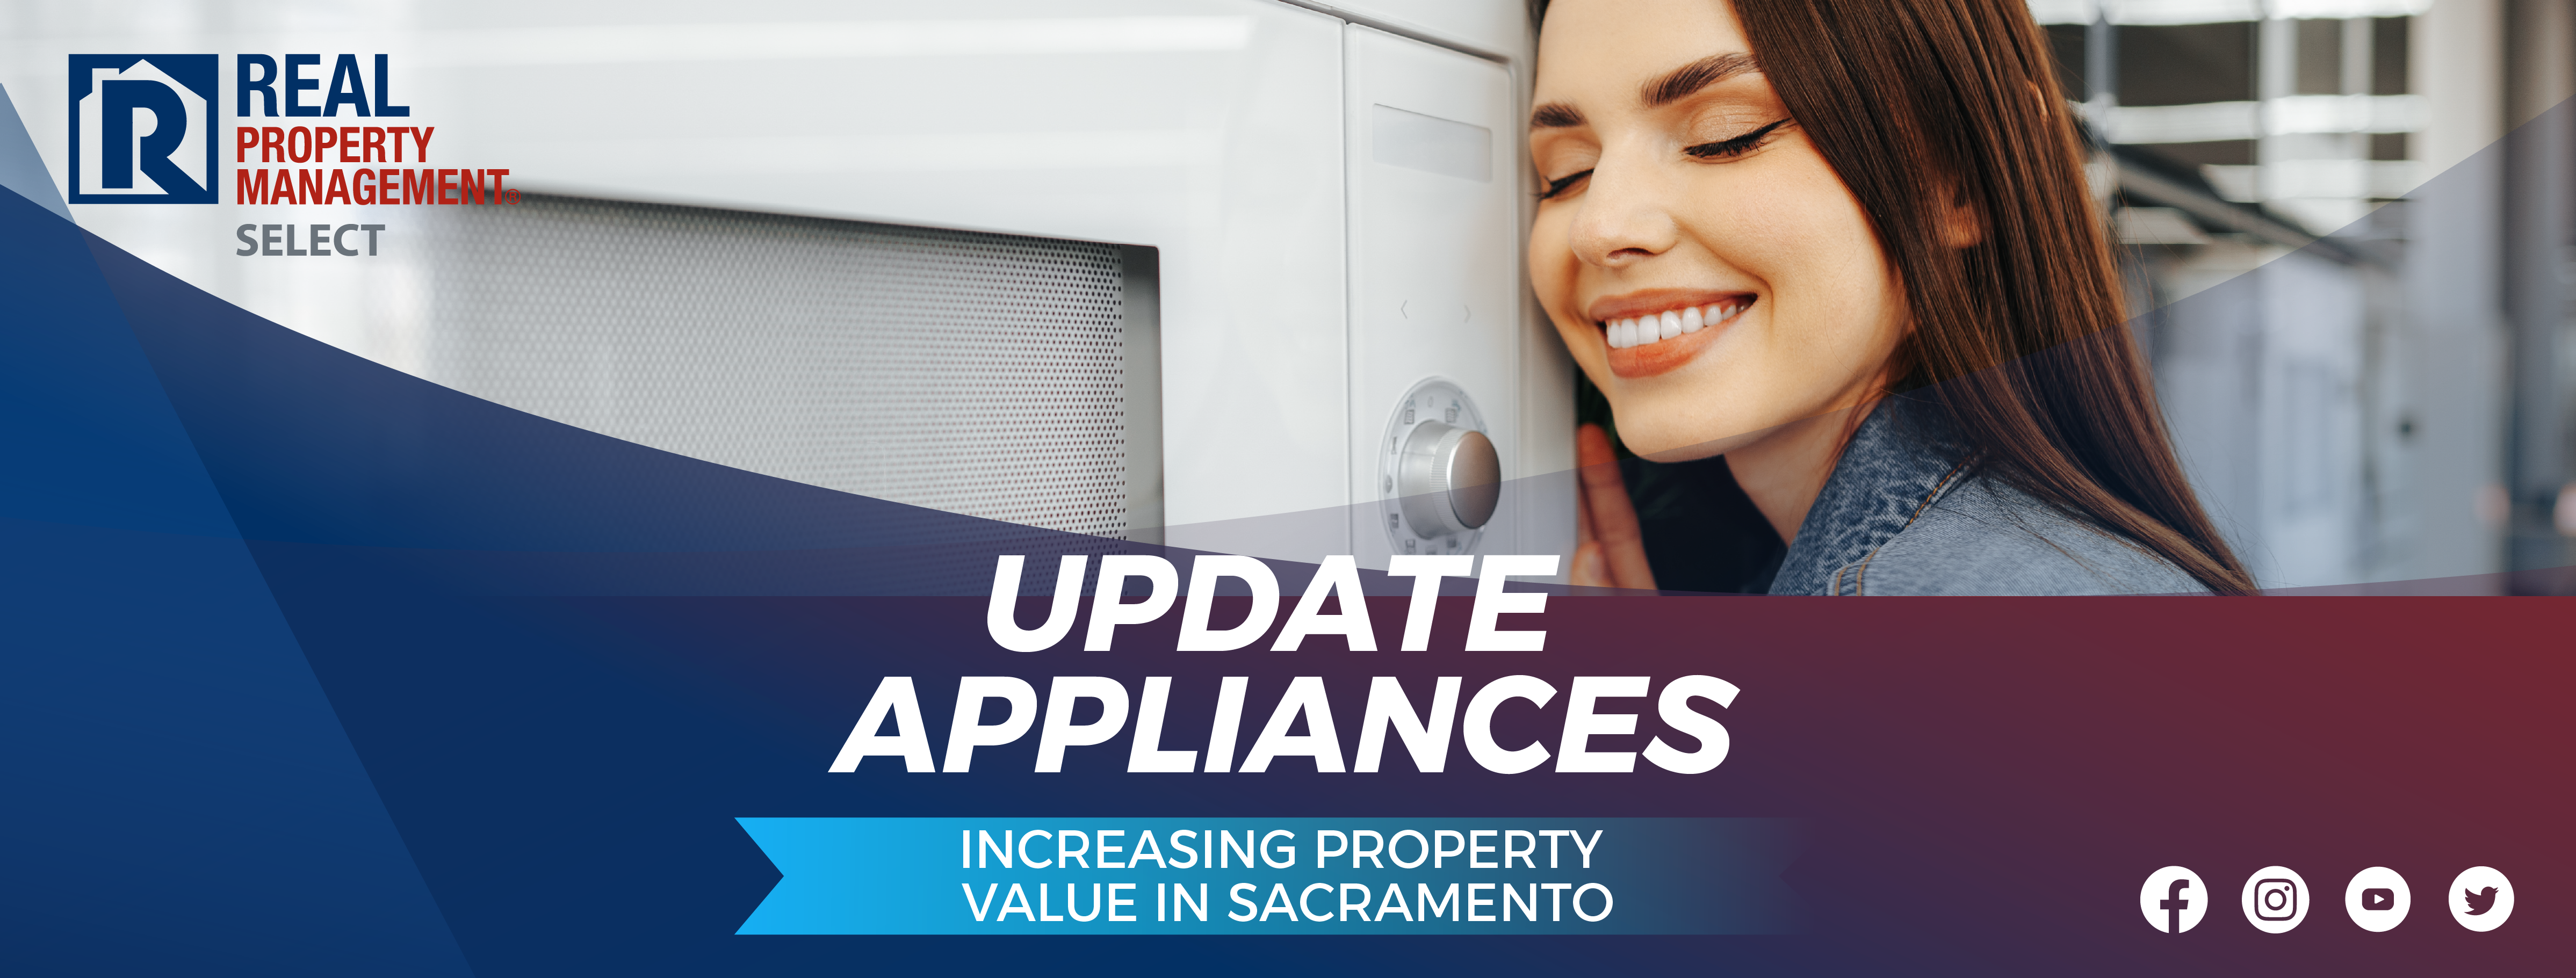 Update Appliances: Increasing Property Value in Sacramento